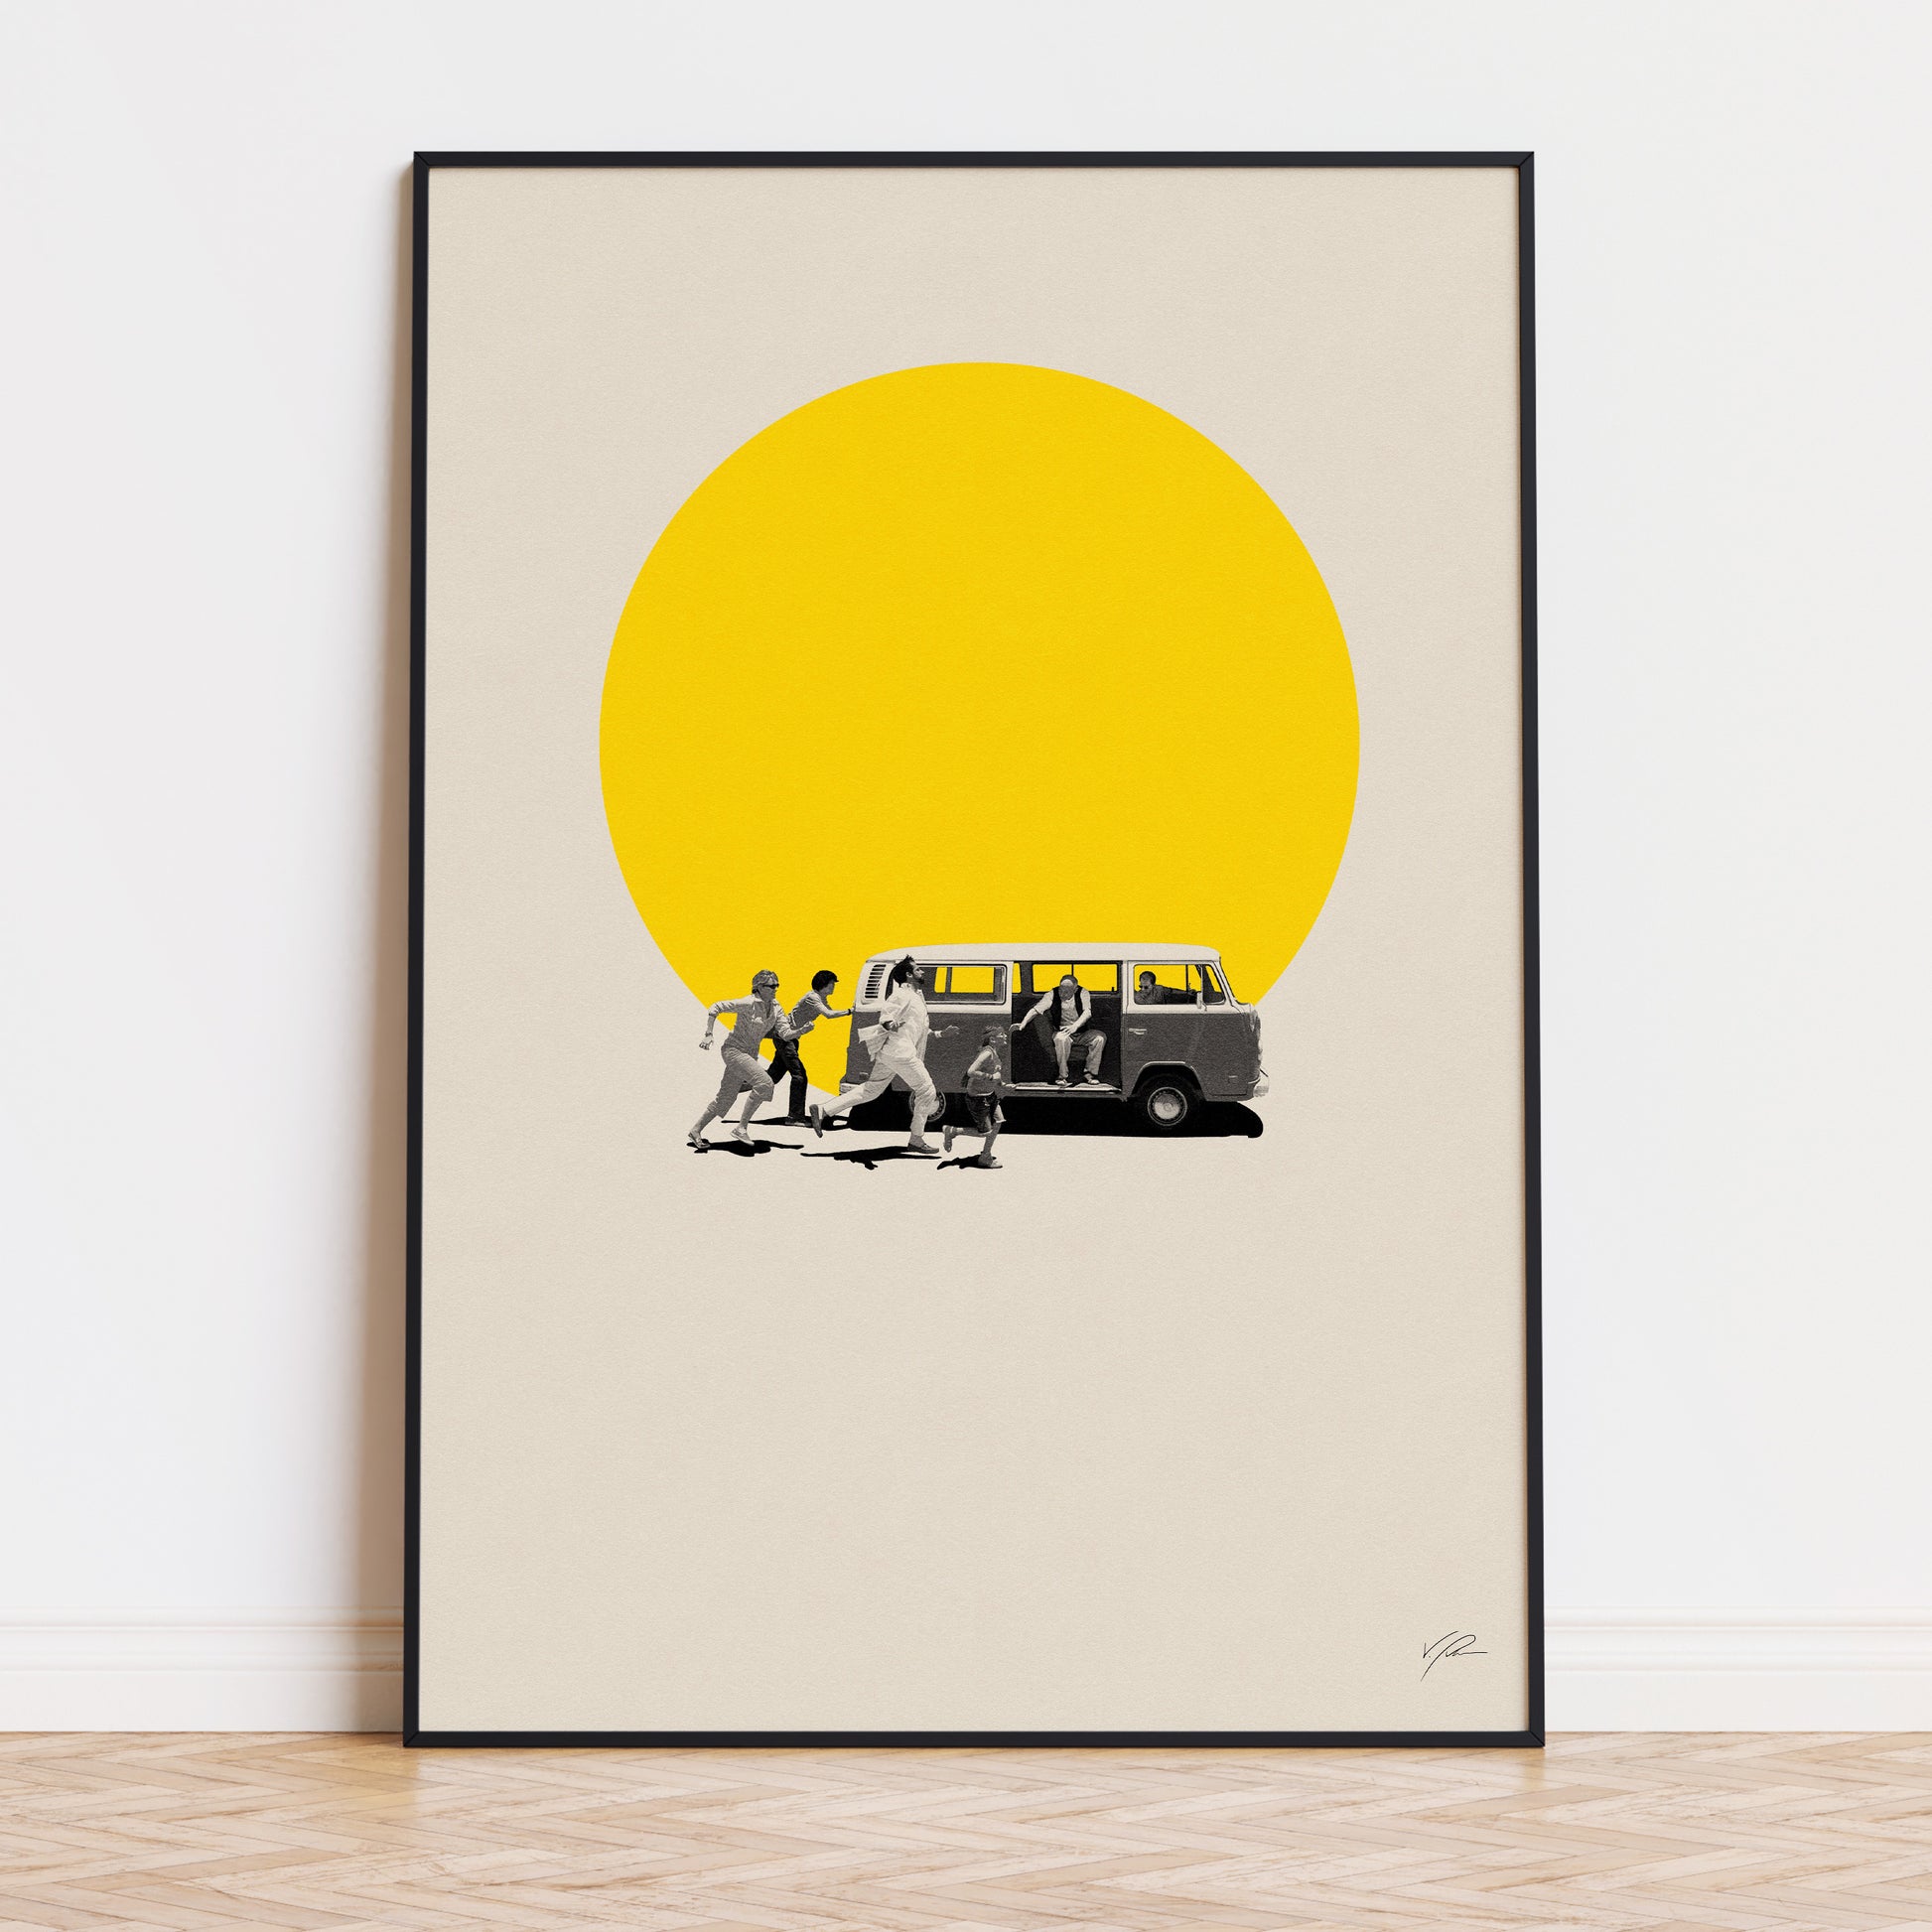 Little Miss Sunshine movie minimalistic print art featuring family chasing after a yellow van yellow sun 